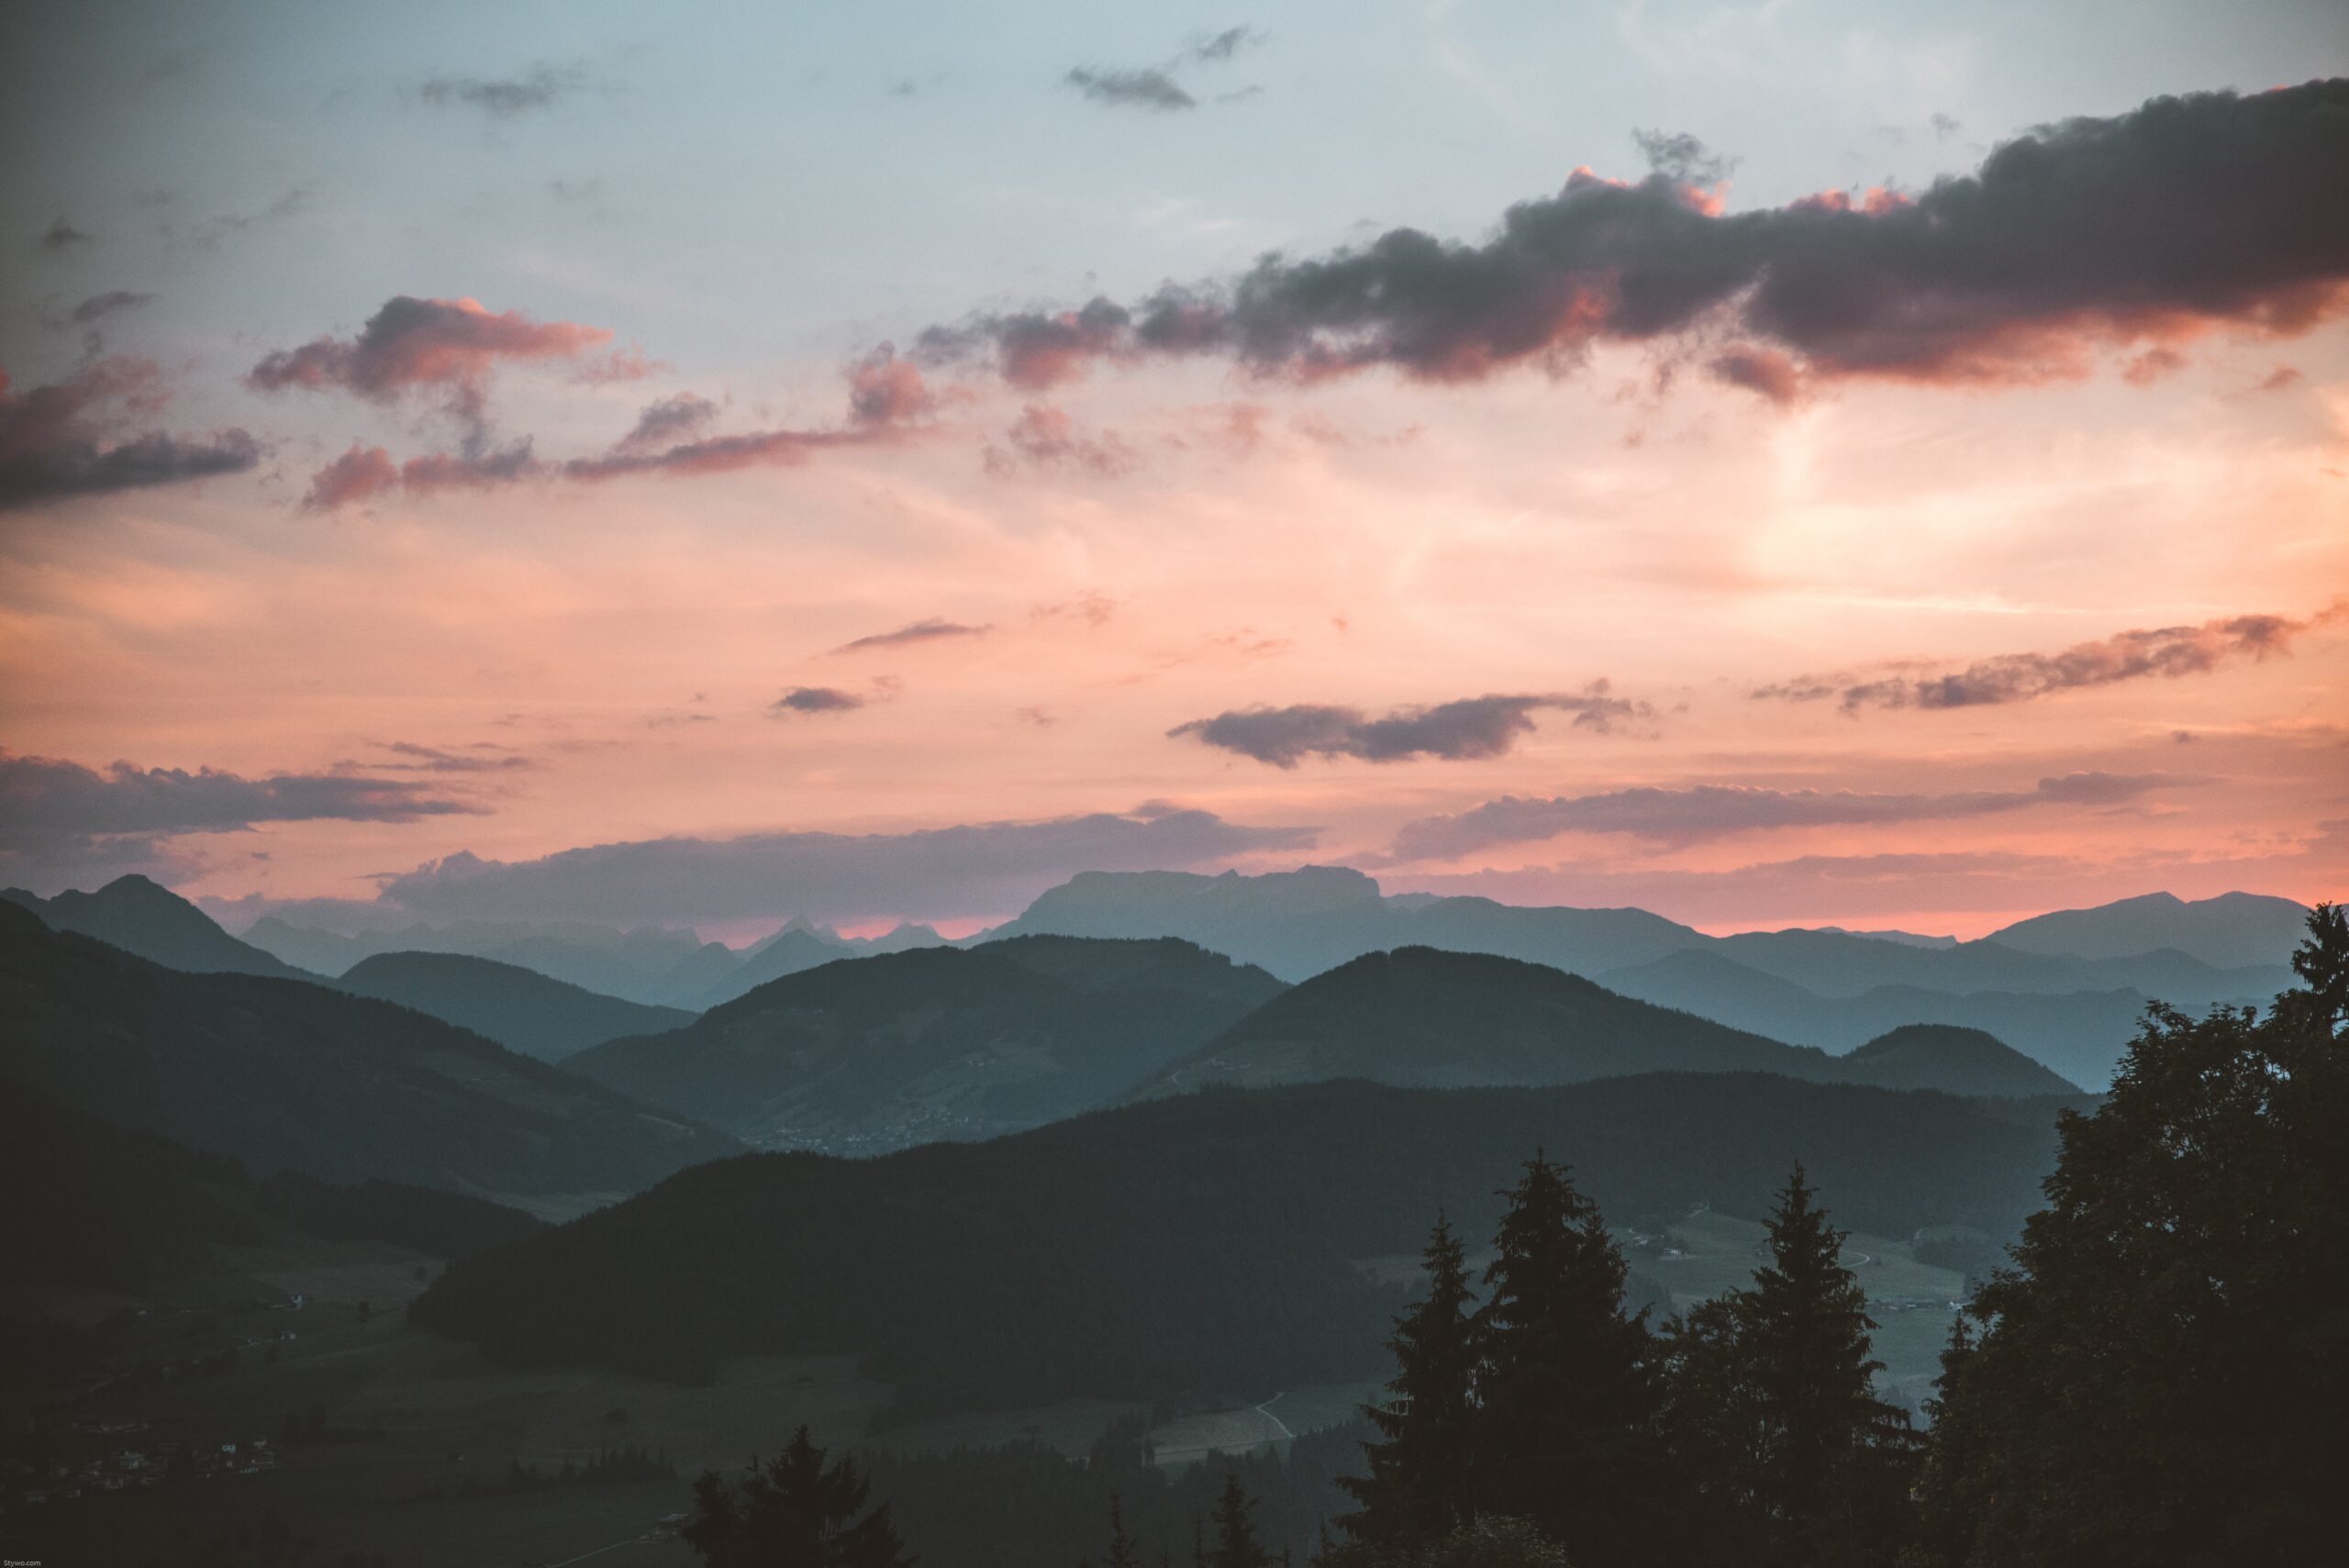 Photo by Stephan Seeber: https://www.pexels.com/photo/scenic-view-of-mountains-during-dawn-1261728/